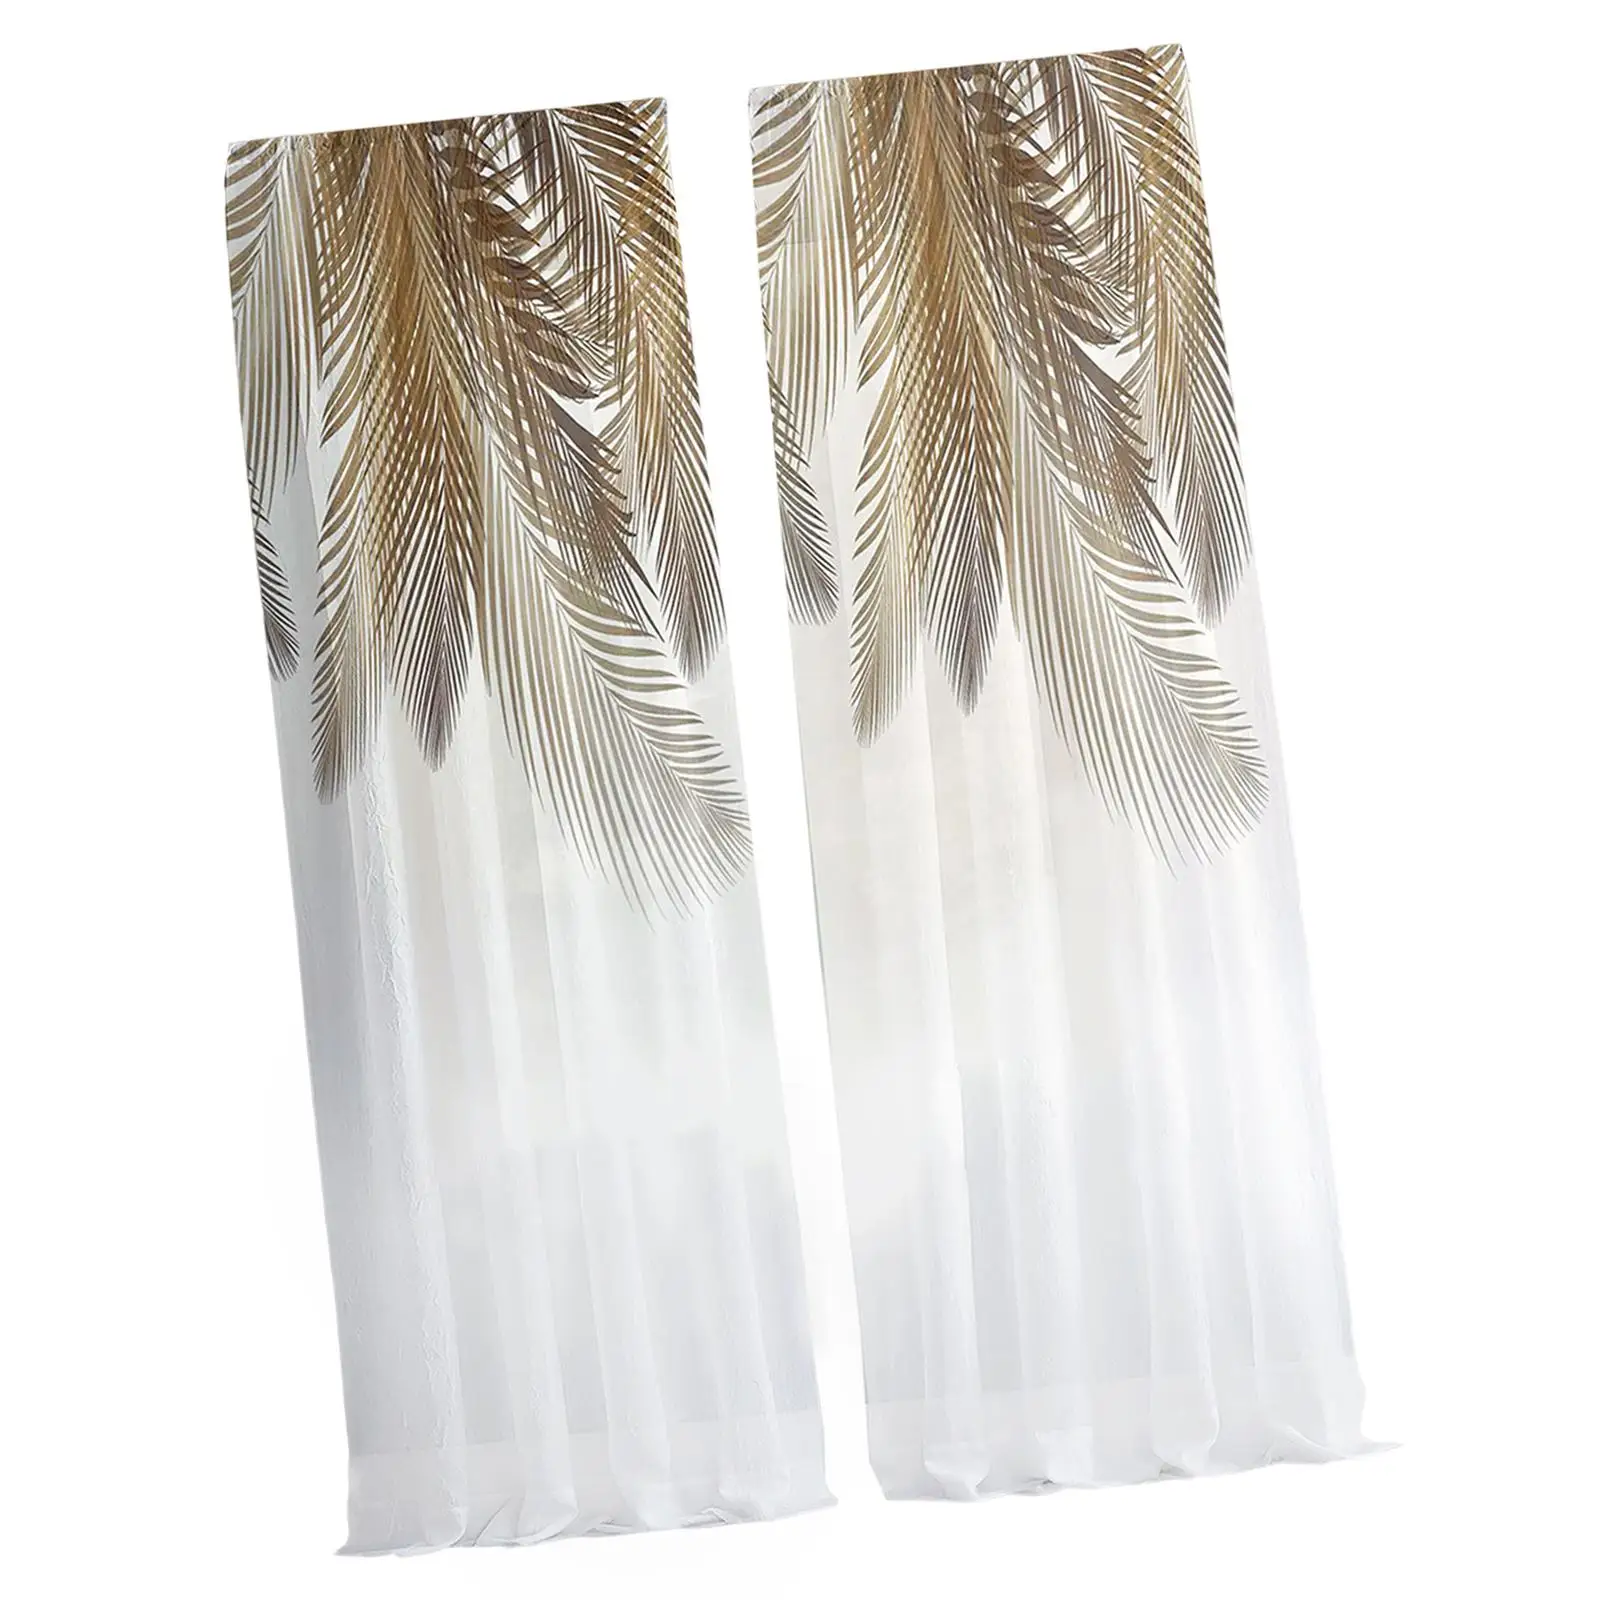 Sheer Curtains Semitransparent Draperies for Bedroom Living Room Kitchen